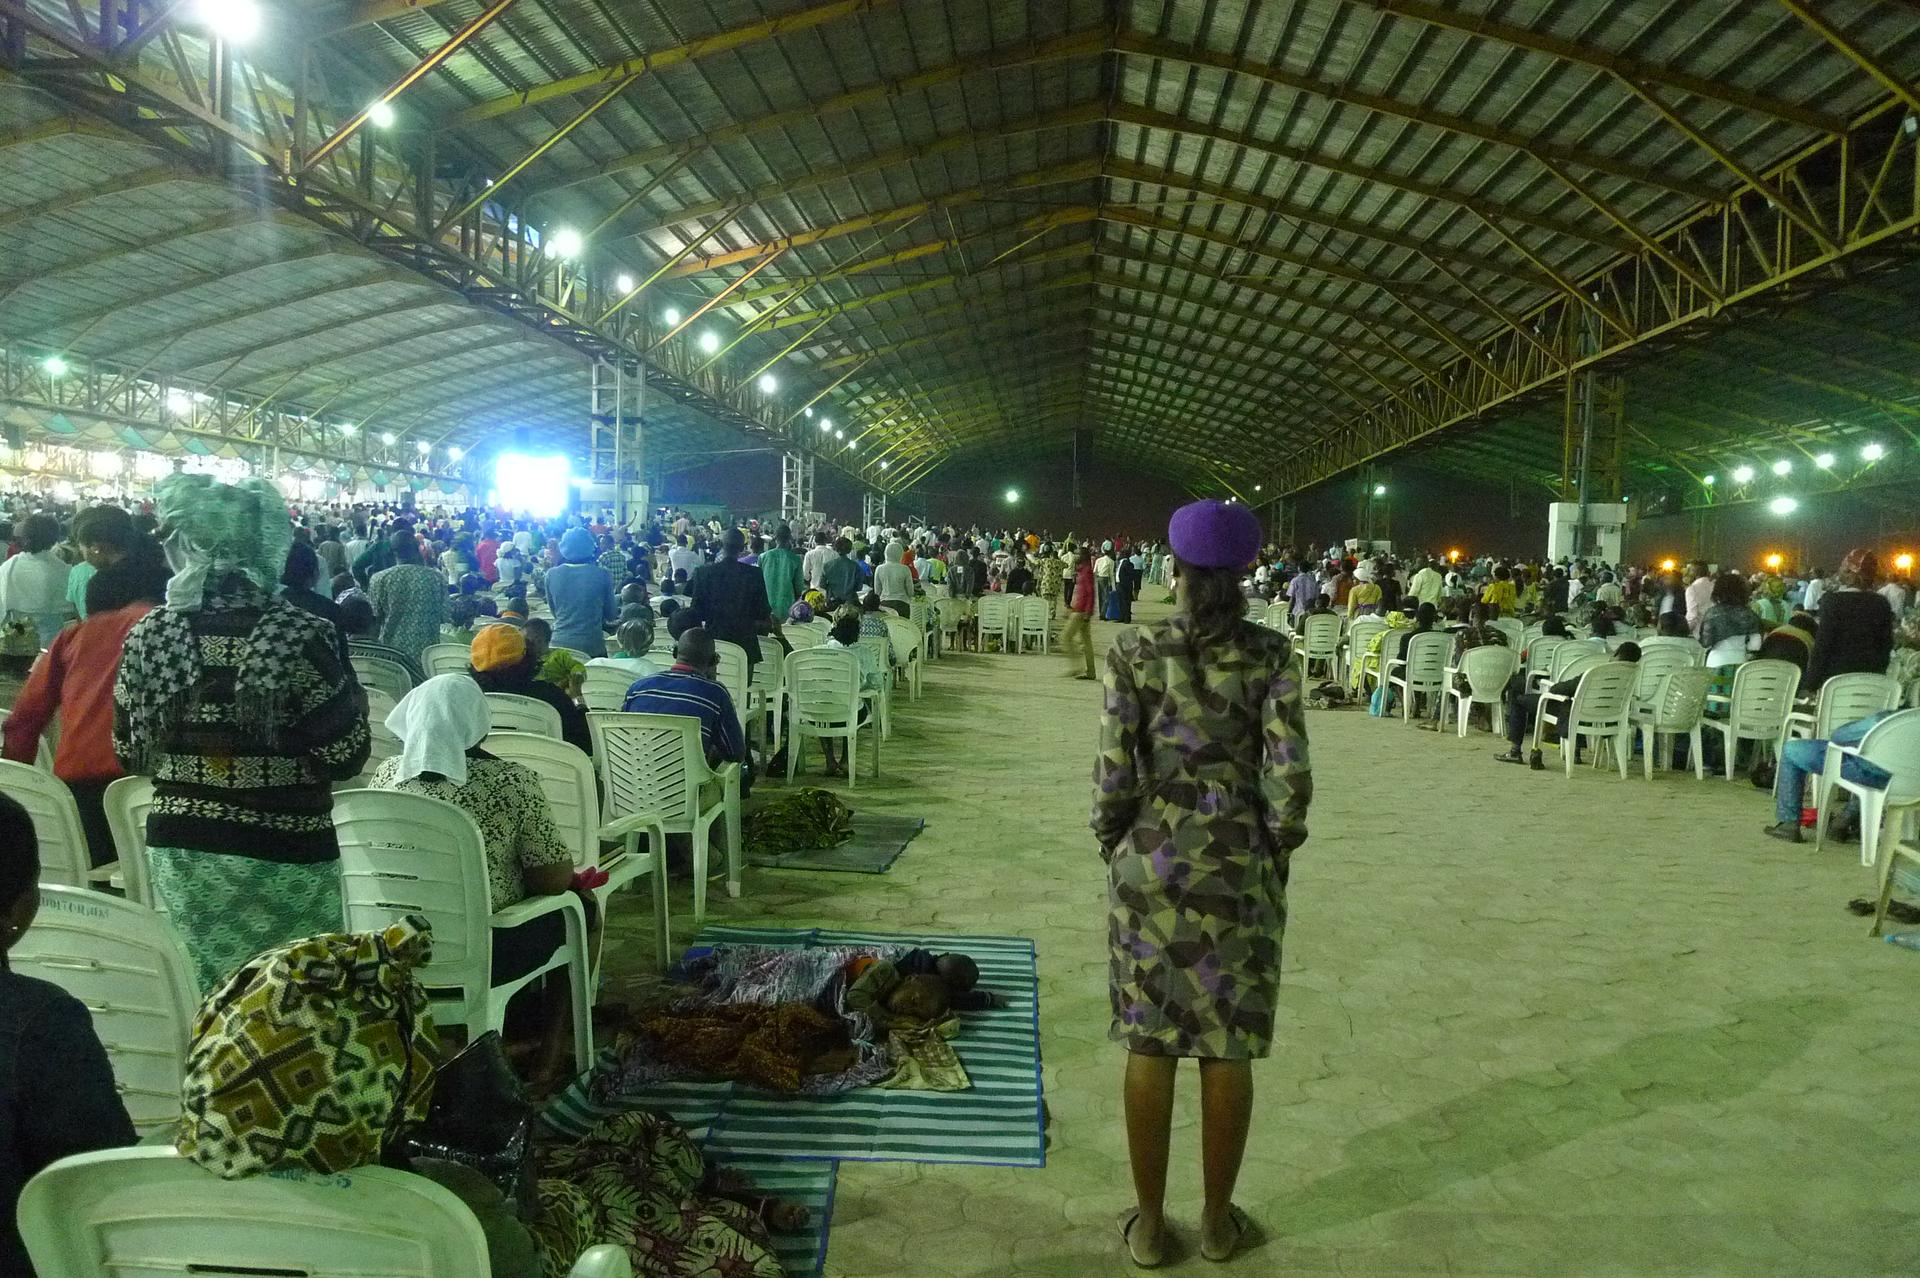 Under an open-air pavilion built to seat a million people, children sleep on mats spread out on the cobblestones while their parents enter their 6th consecutive hour of worship.